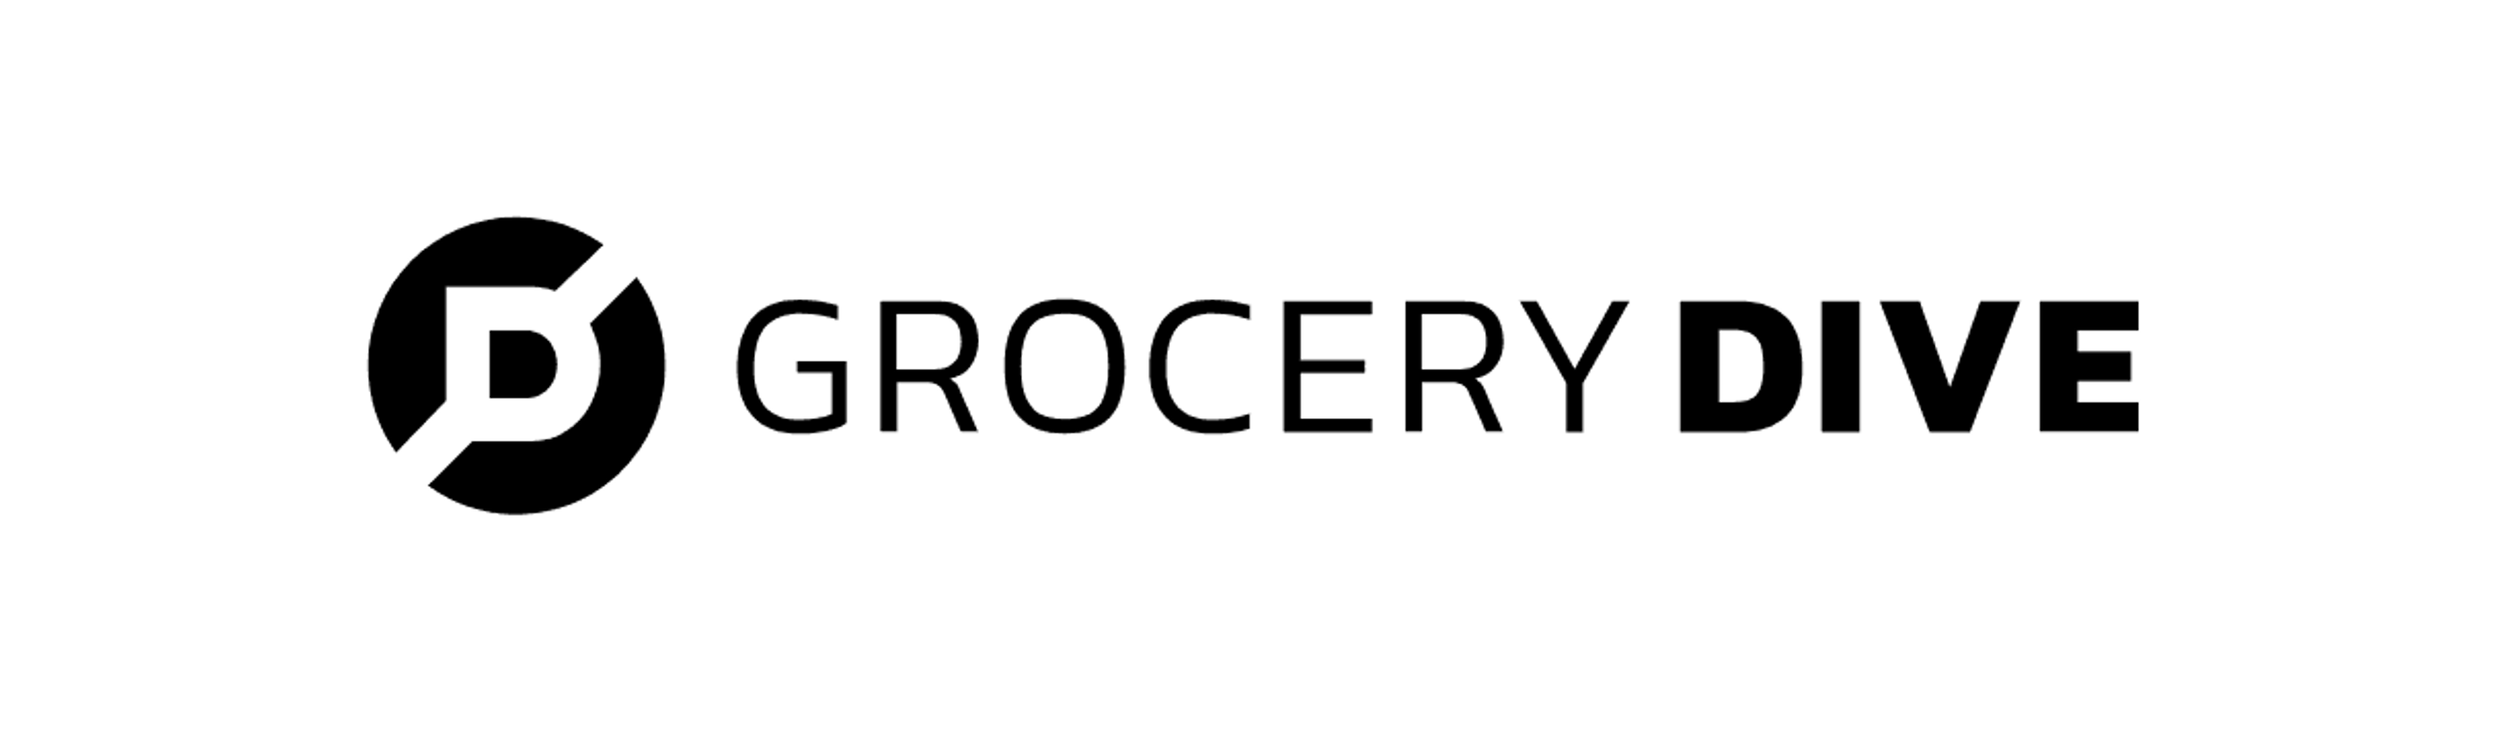 grocery-dive-logo-vector.png